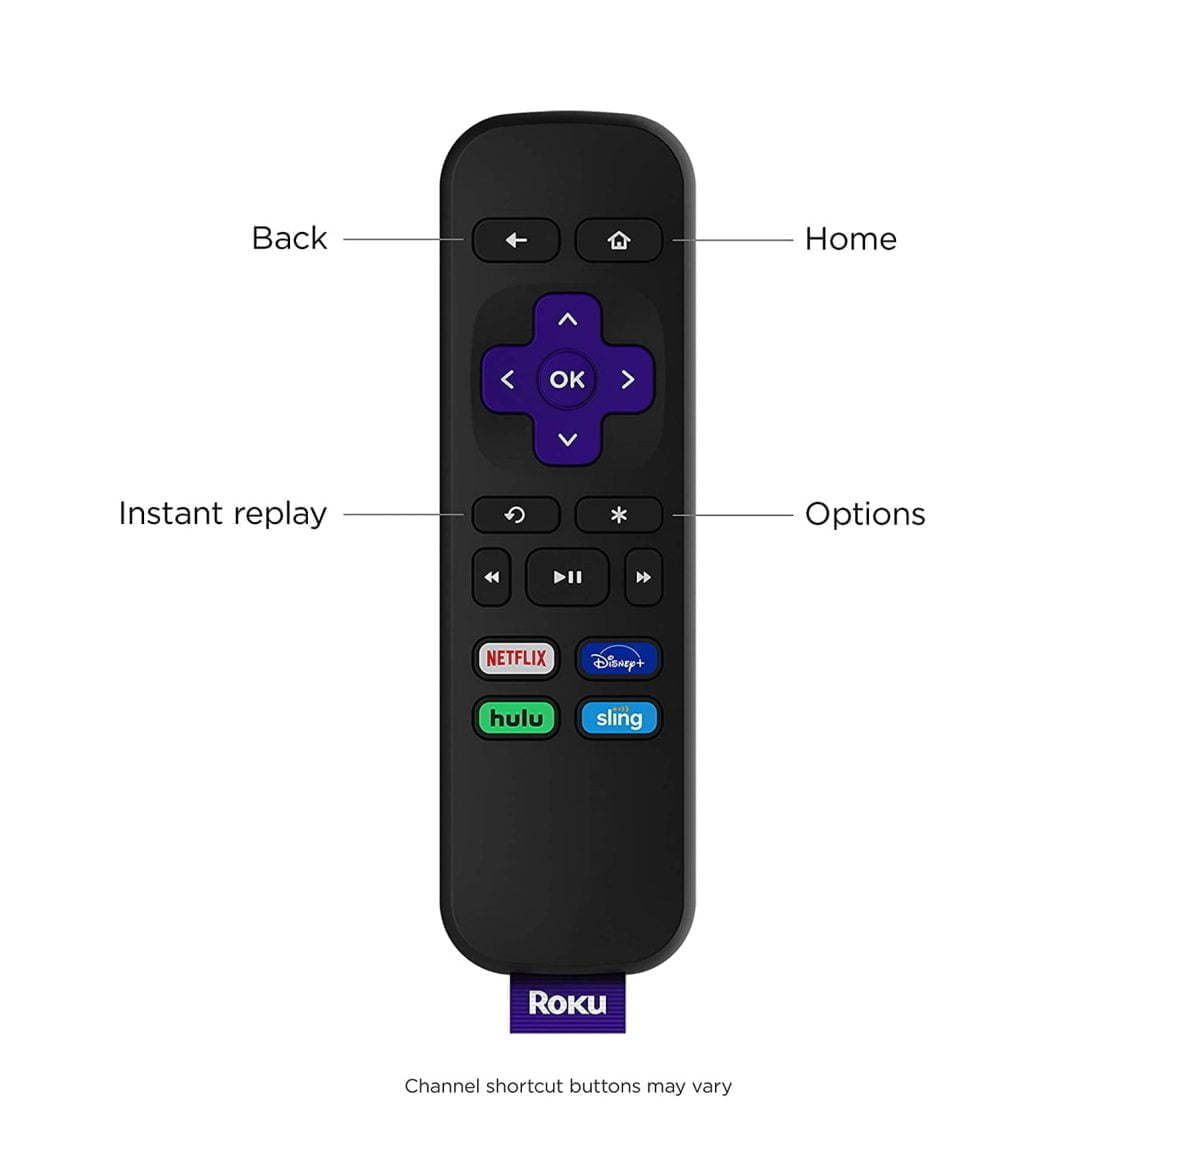 713Dpijslll. Ac Sl1500 Roku &Lt;H1&Gt;Roku Express | Hd Streaming Media Player With High Speed Hdmi Cable And Simple Remote&Lt;/H1&Gt; &Lt;Ul Class=&Quot;A-Unordered-List A-Vertical A-Spacing-Mini&Quot;&Gt; &Lt;Li&Gt;&Lt;Span Class=&Quot;A-List-Item&Quot;&Gt; Streaming Made Easy: Roku Express Lets You Stream Free, Live And Premium Tv Over The Internet Right To Your Tv; It’s Perfect For New Users, Secondary Tvs And Easy Gifting But Powerful Enough For Seasoned Pros &Lt;/Span&Gt;&Lt;/Li&Gt; &Lt;Li&Gt;&Lt;Span Class=&Quot;A-List-Item&Quot;&Gt; Quick And Easy Setup: Just Plug It Into Your Tv With The Included High Speed Hdmi Cable And Connect To The Internet To Get Started &Lt;/Span&Gt;&Lt;/Li&Gt; &Lt;Li&Gt;&Lt;Span Class=&Quot;A-List-Item&Quot;&Gt; Tons Of Power, Tons Of Fun: Compact And Fast, You’ll Stream Your Favorites With Ease; With Movies And Series On Apple Tv+, Prime Video, Netflix, Disney+, Hbo Max, Showtime, And Hulu With Live Tv, Enjoy The Most Talked About Entertainment &Lt;/Span&Gt;&Lt;/Li&Gt; &Lt;Li&Gt;&Lt;Span Class=&Quot;A-List-Item&Quot;&Gt; Simple Remote: Incredibly Easy To Use, This Remote Features Shortcut Buttons To Popular Streaming Channels &Lt;/Span&Gt;&Lt;/Li&Gt; &Lt;Li&Gt;&Lt;Span Class=&Quot;A-List-Item&Quot;&Gt; Endless Entertainment: Stream It All, Including Free Tv, Live News, Sports, And More; Never Miss Award-Winning Shows, The Latest Blockbuster Hits, And More; Access 500, 000+ Movies And Tv Episodes; Stream What You Love And Cut Back On Cable Tv Bills &Lt;/Span&Gt;&Lt;/Li&Gt; &Lt;Li&Gt;&Lt;Span Class=&Quot;A-List-Item&Quot;&Gt; Enjoy Free Tv Channels: Stream Live Tv, 24/7 News, Sports, Movies, Shows, And More On The Roku Channel, Plus A Huge Collection Of Free Entertainment From Top Channels On Featured Free &Lt;/Span&Gt;&Lt;/Li&Gt; &Lt;/Ul&Gt; &Lt;Div Class=&Quot;A-Row A-Expander-Container A-Expander-Inline-Container&Quot;&Gt; &Lt;Div Class=&Quot;A-Expander-Content A-Expander-Extend-Content A-Expander-Content-Expanded&Quot;&Gt; &Lt;Ul Class=&Quot;A-Unordered-List A-Vertical A-Spacing-None&Quot;&Gt; &Lt;Li&Gt;&Lt;Span Class=&Quot;A-List-Item&Quot;&Gt;The Free Roku Mobile App: Turn Your Ios Or Android Device Into The Ultimate Streaming Companion; Control Your Roku Express Media Player Or Roku Tv, Use Voice Search, Enjoy Private Listening, And More On Ios And Android&Lt;/Span&Gt;&Lt;/Li&Gt; &Lt;Li&Gt;&Lt;Span Class=&Quot;A-List-Item&Quot;&Gt;Automatic Software Updates: Get The Most Up To Date Software Including All The Latest Features And Available Channels Without Even Thinking About It&Lt;/Span&Gt;&Lt;/Li&Gt; &Lt;Li&Gt;&Lt;Span Class=&Quot;A-List-Item&Quot;&Gt;Works With Popular Voice Assistants: Enjoy Easy Voice Control With Siri, Alexa, Or Hey Google&Lt;/Span&Gt;&Lt;/Li&Gt; &Lt;/Ul&Gt; &Lt;/Div&Gt; &Lt;/Div&Gt; Roku Express Roku Express | Hd Streaming Media Player With High Speed Hdmi Cable And Simple Remote